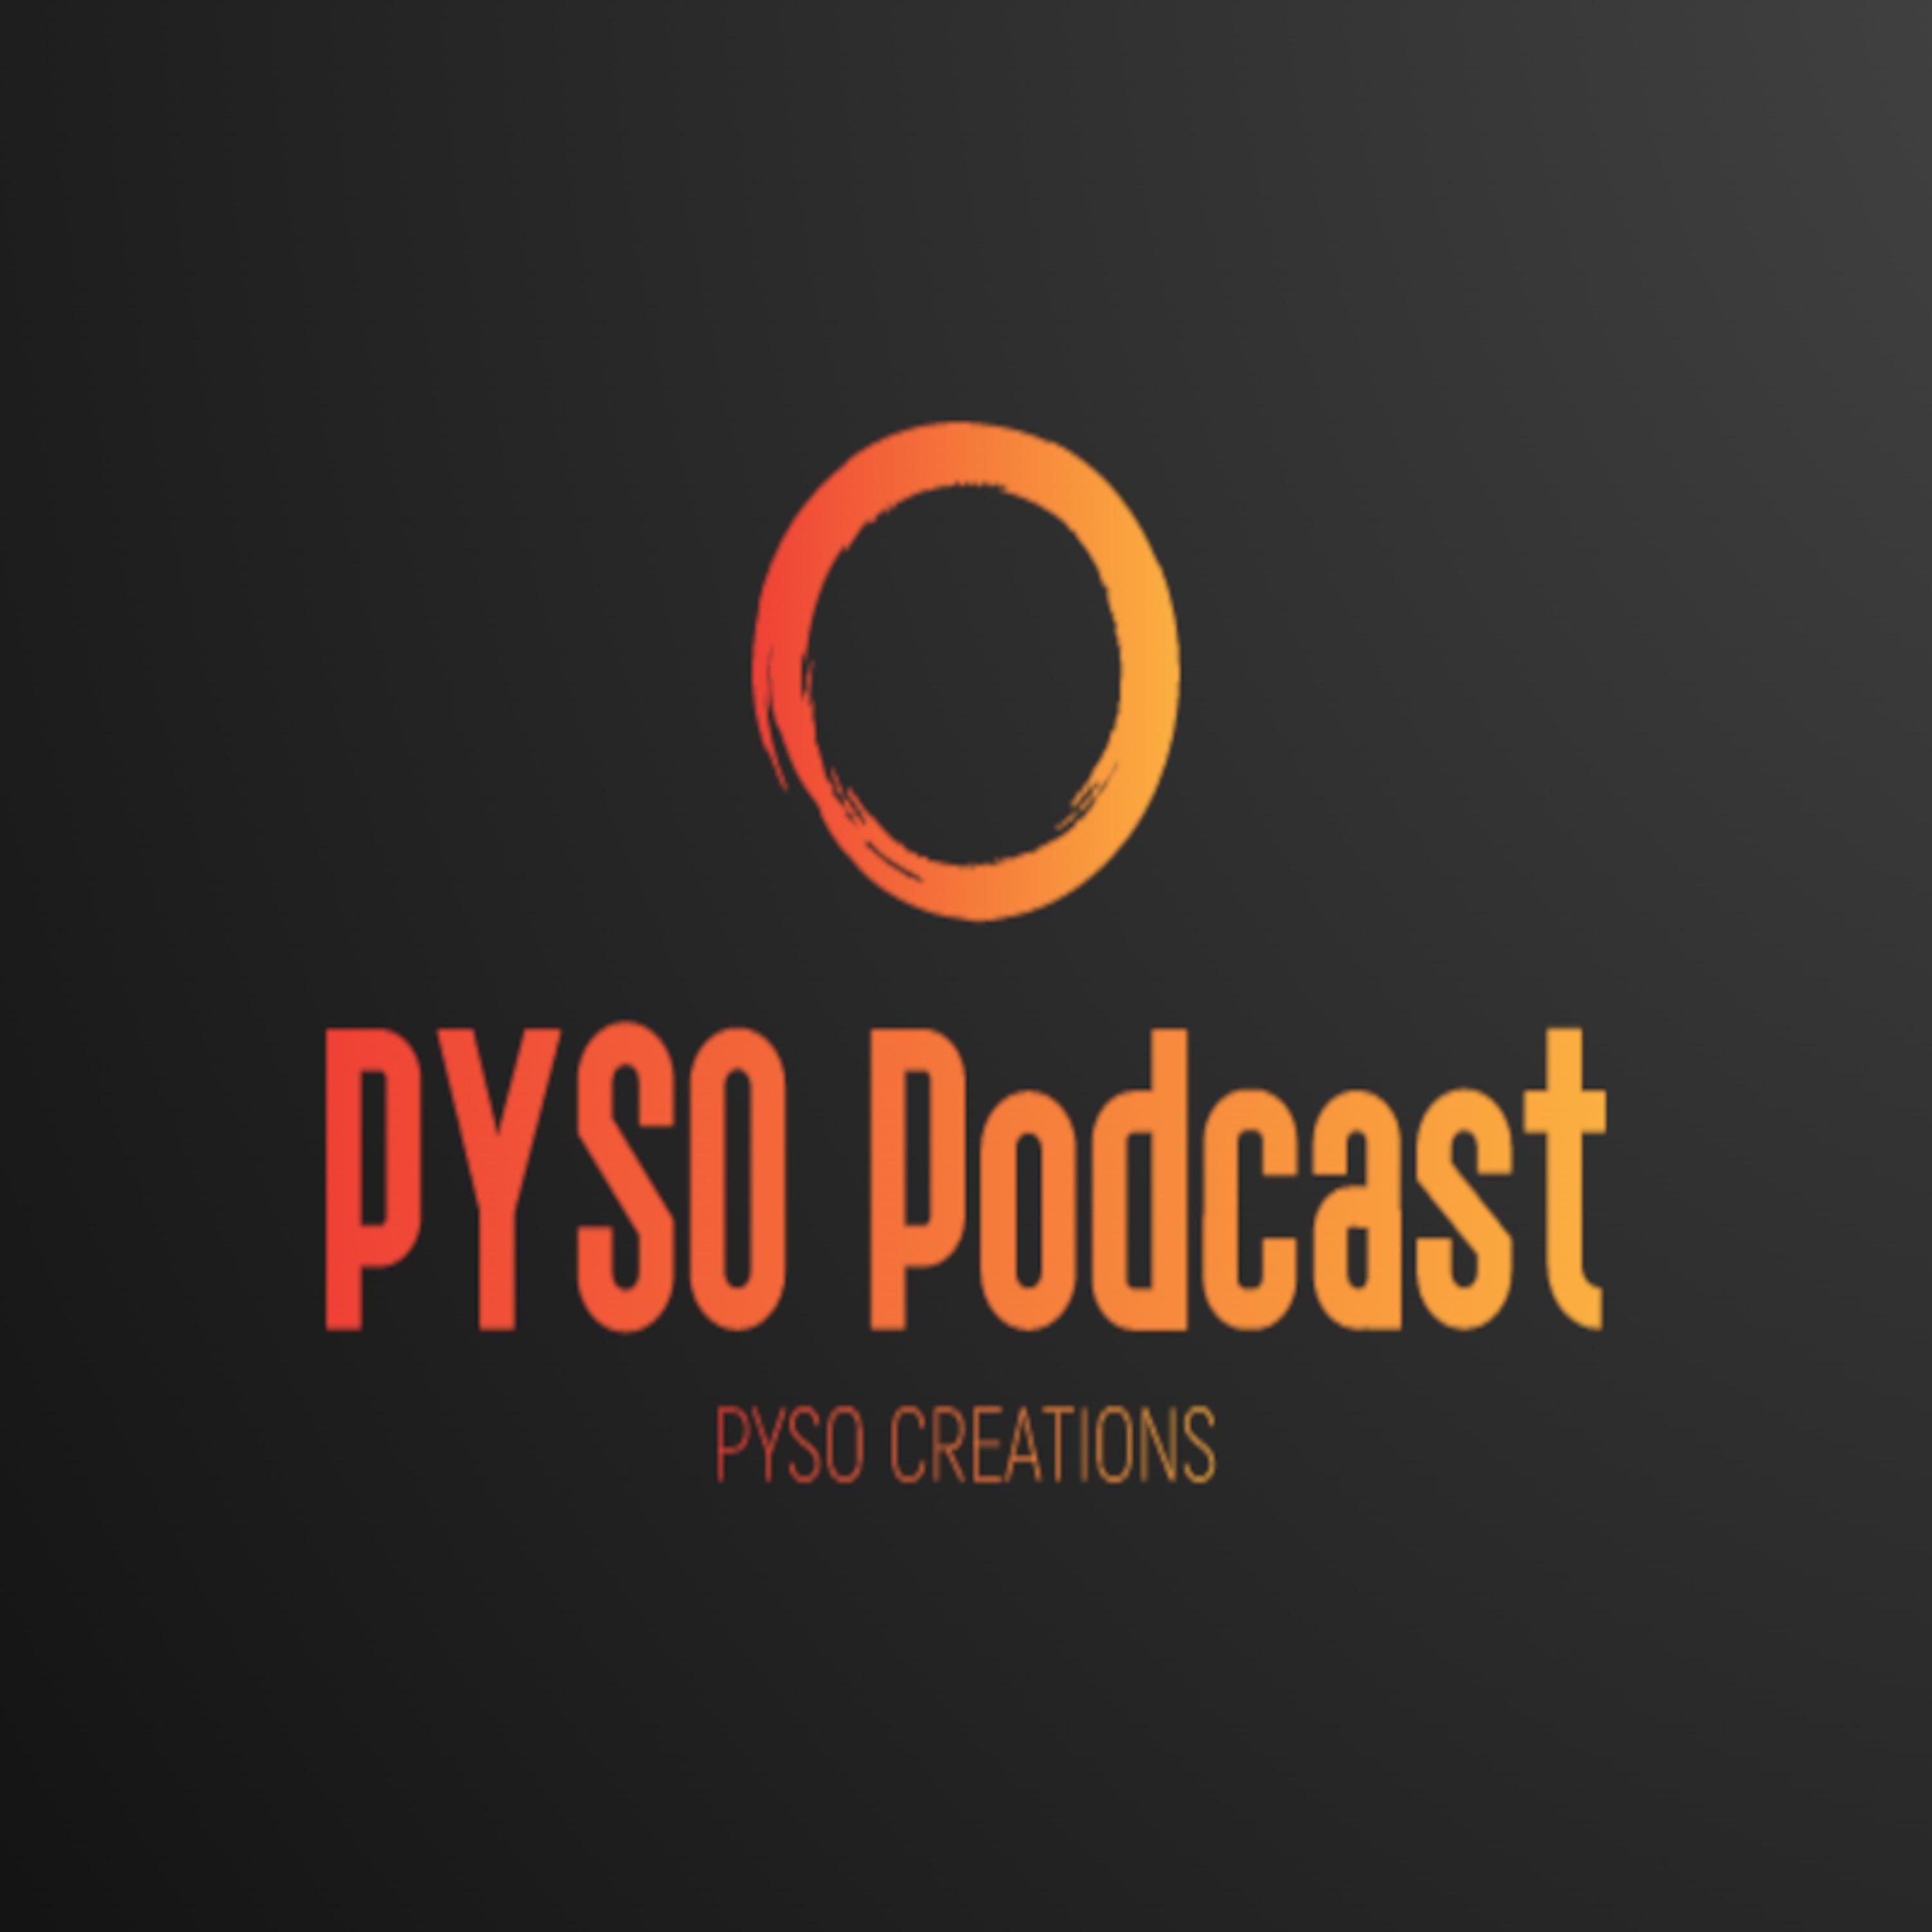 P.Y.S.O. Podcast